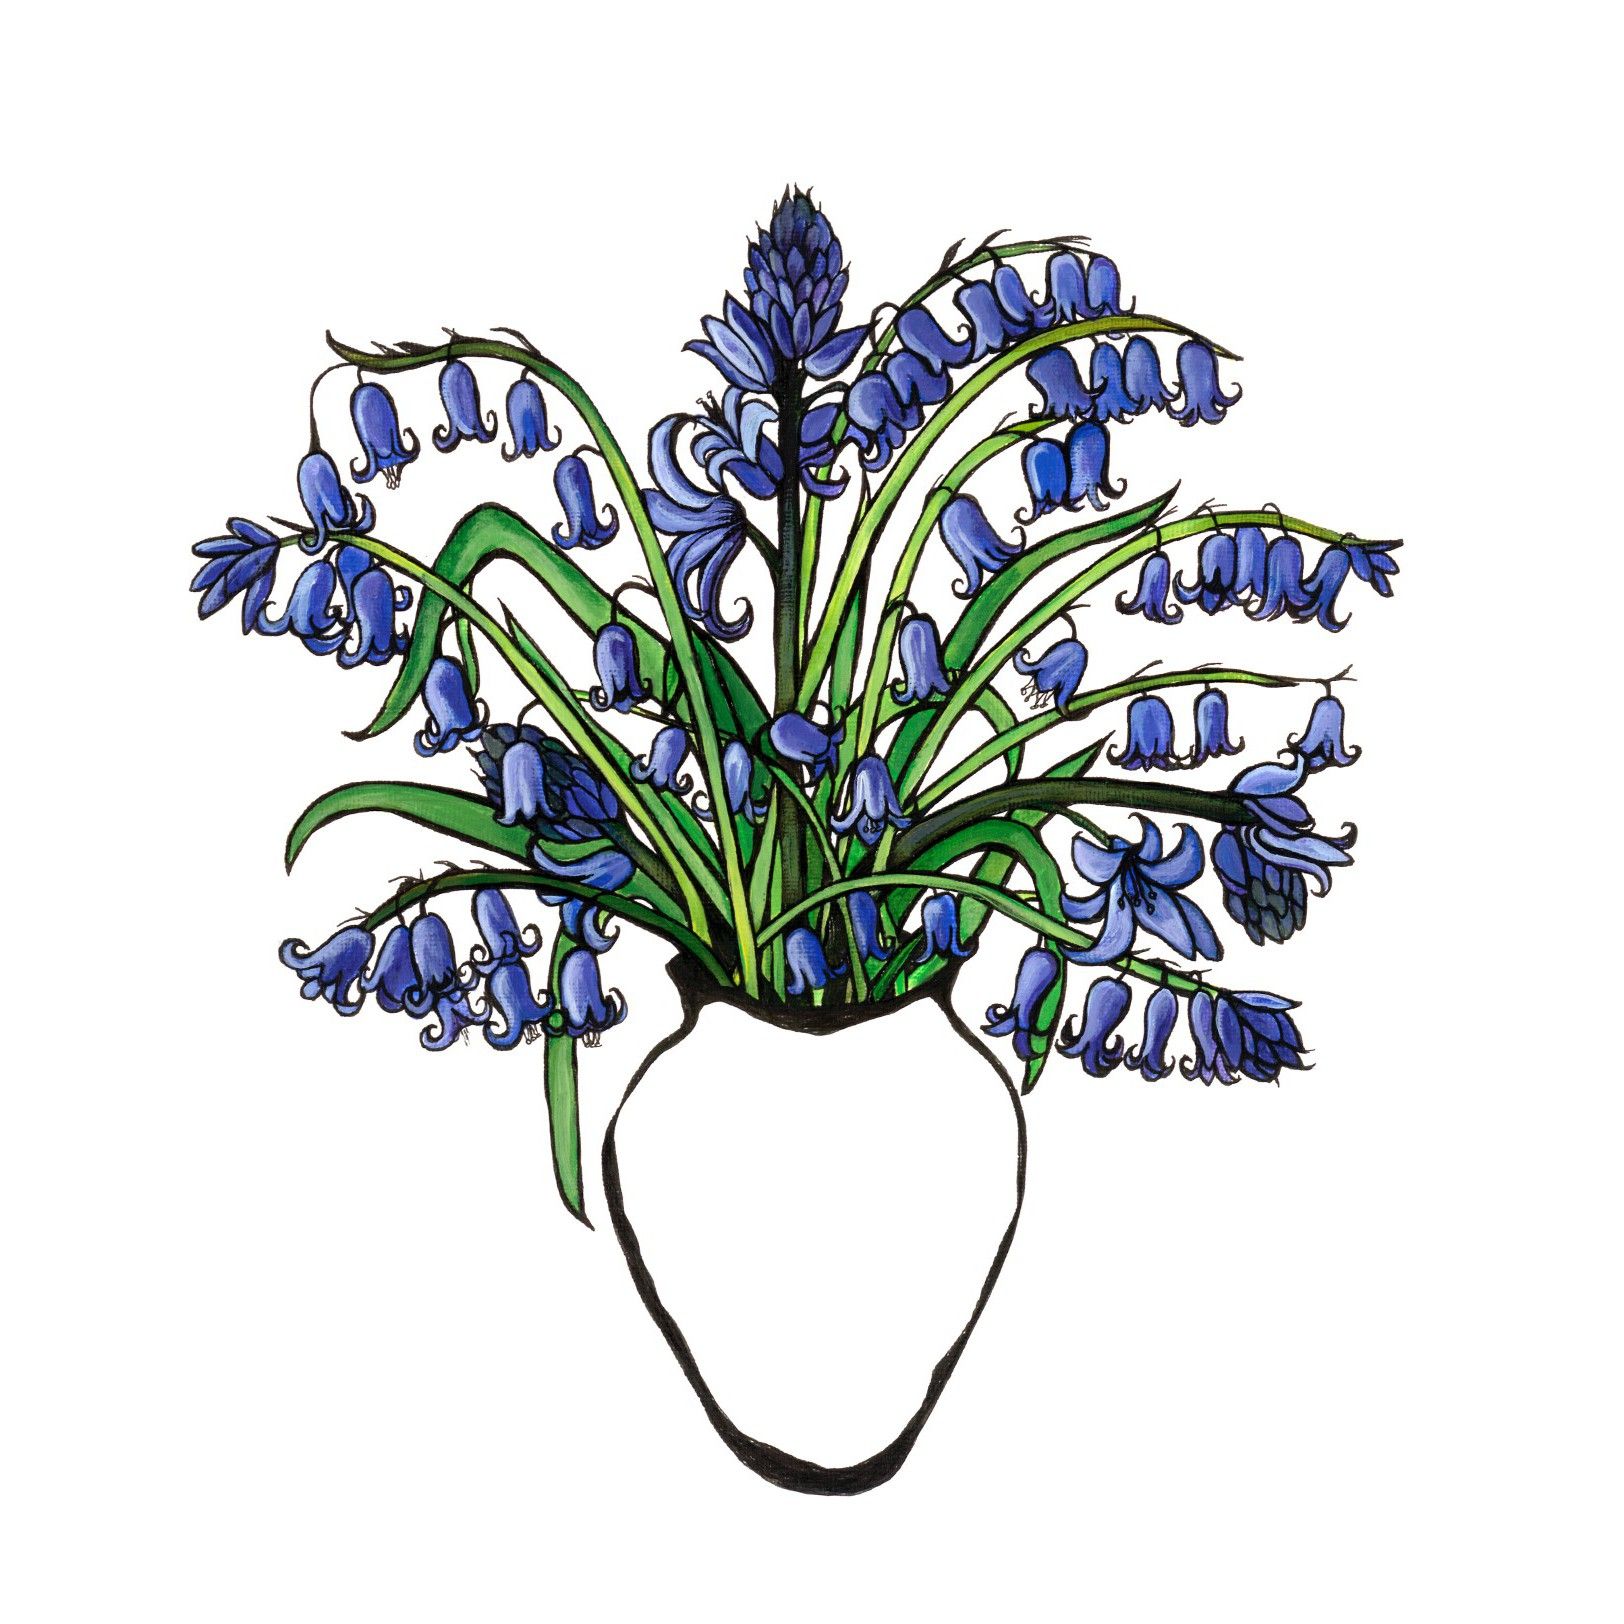 Bluebells by Lucy Routh